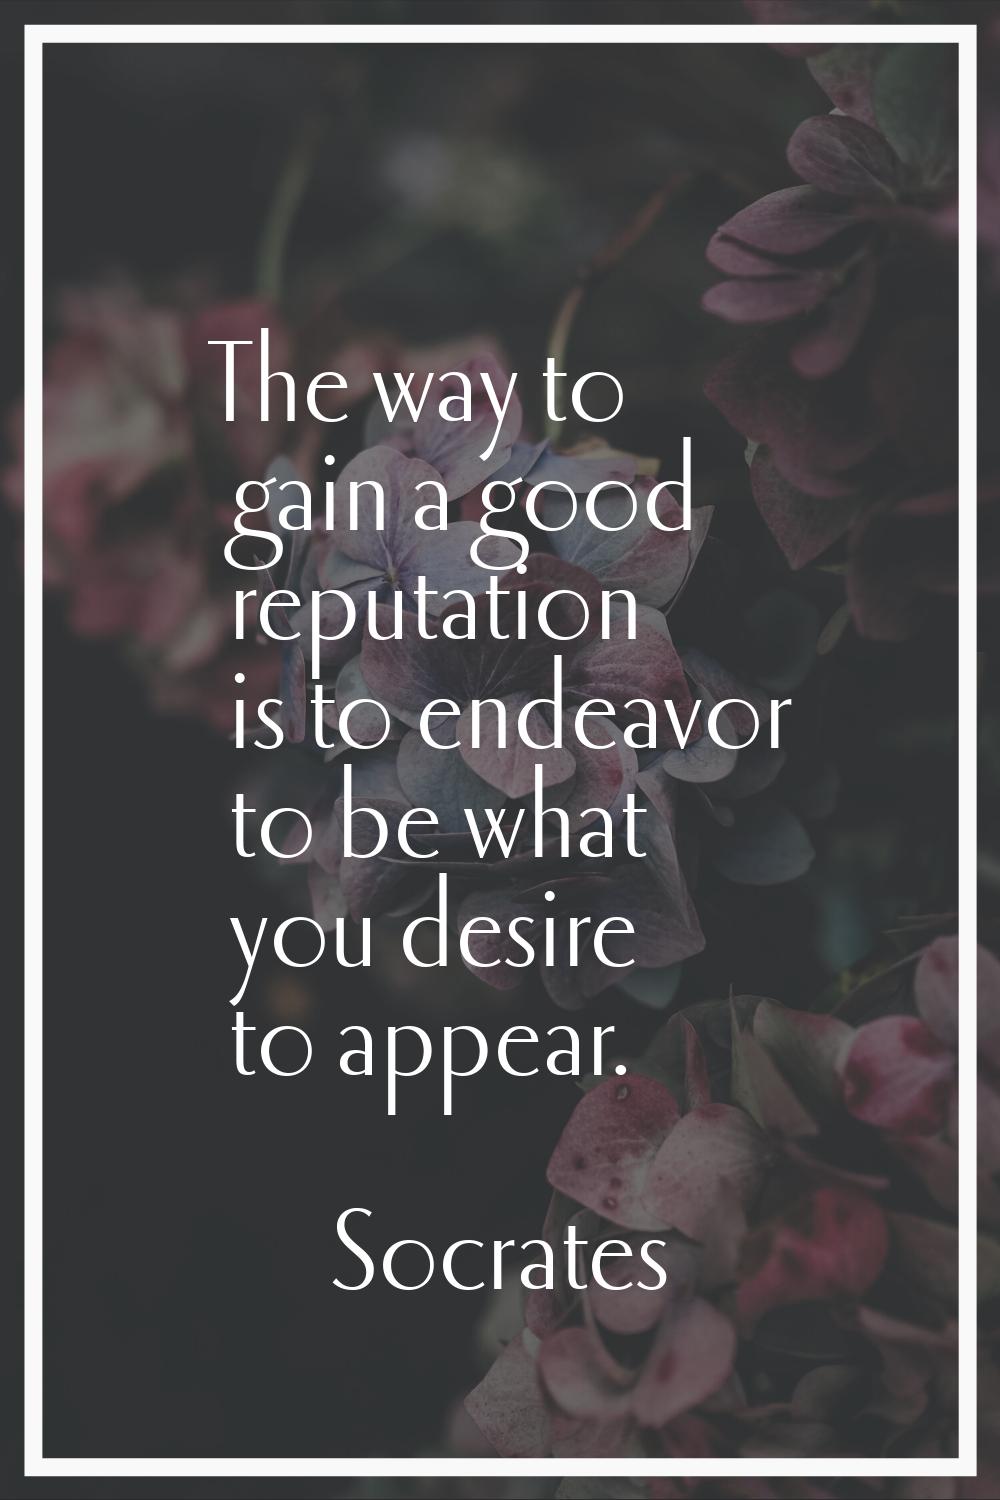 The way to gain a good reputation is to endeavor to be what you desire to appear.